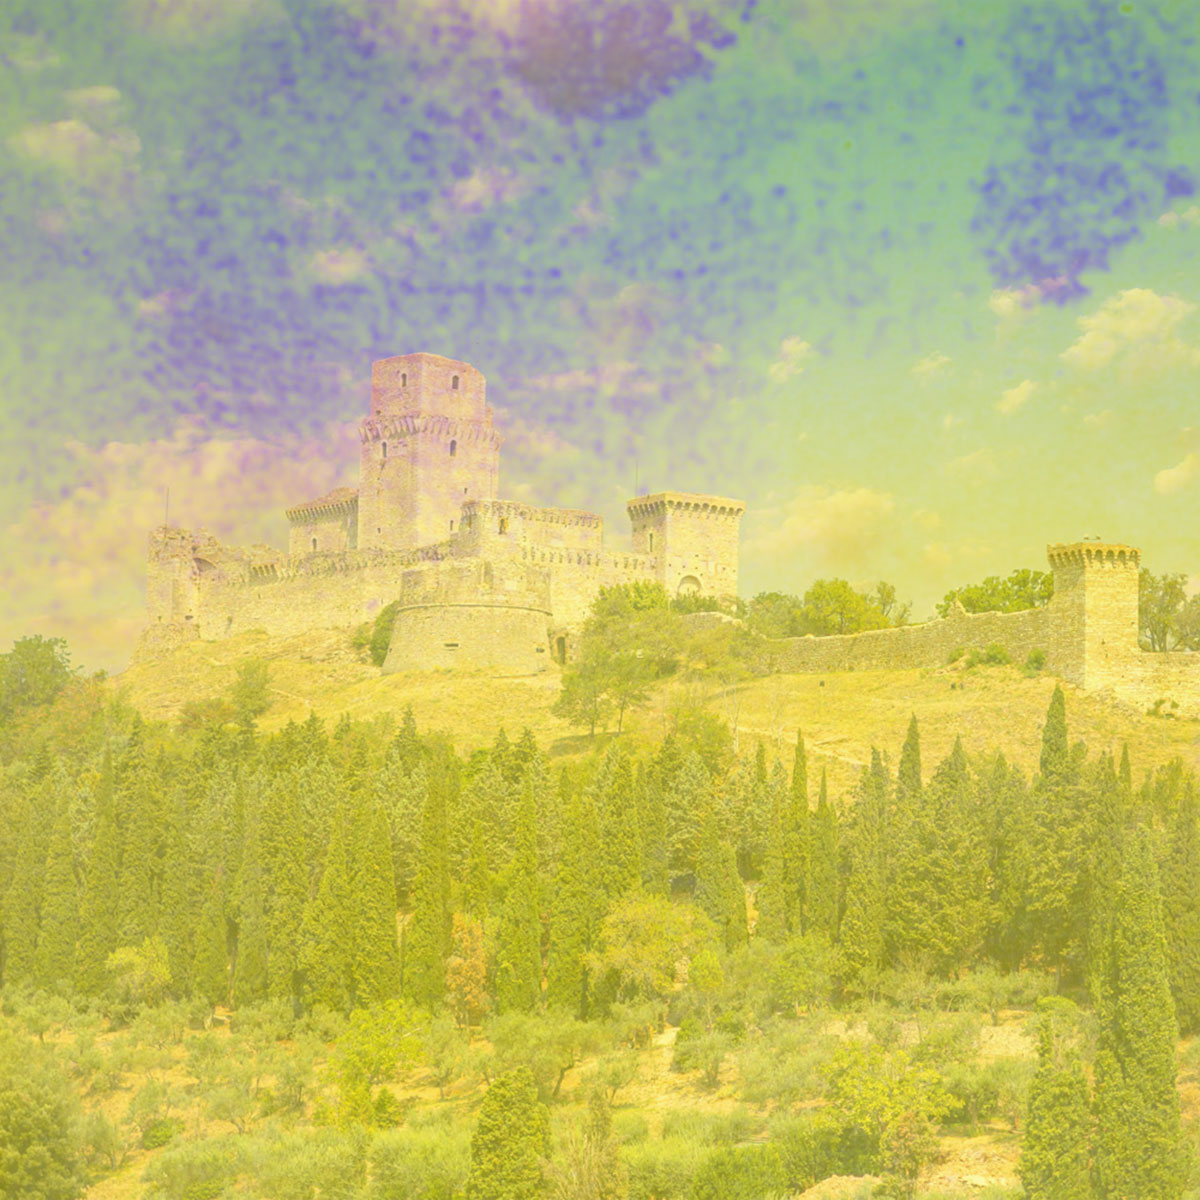 http://www.ogniangoloognipietra.it/wp-content/uploads/2022/08/rocca-maggiore-assisi-panoramica.jpg